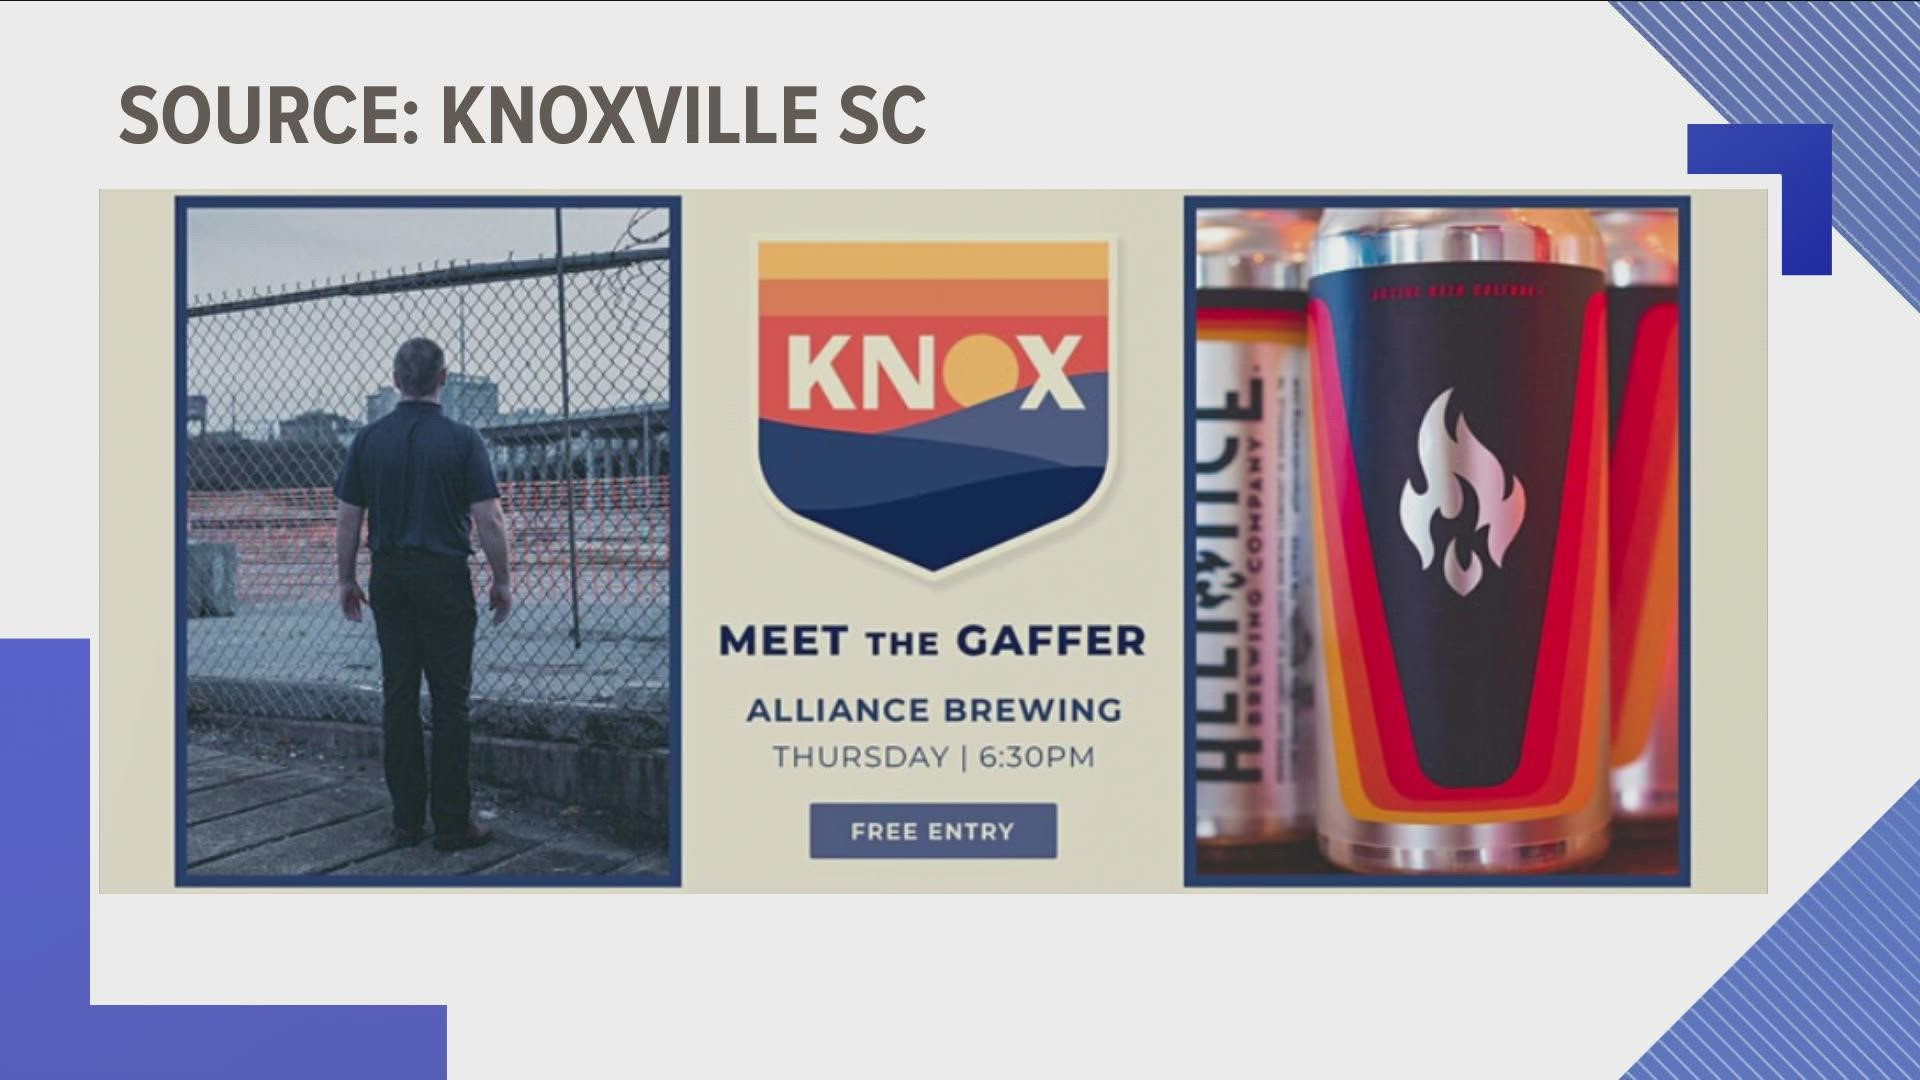 One Knoxville Sporting Club also helps connect soccer players to the community. People will be able to meet the new coach on Jan. 13.